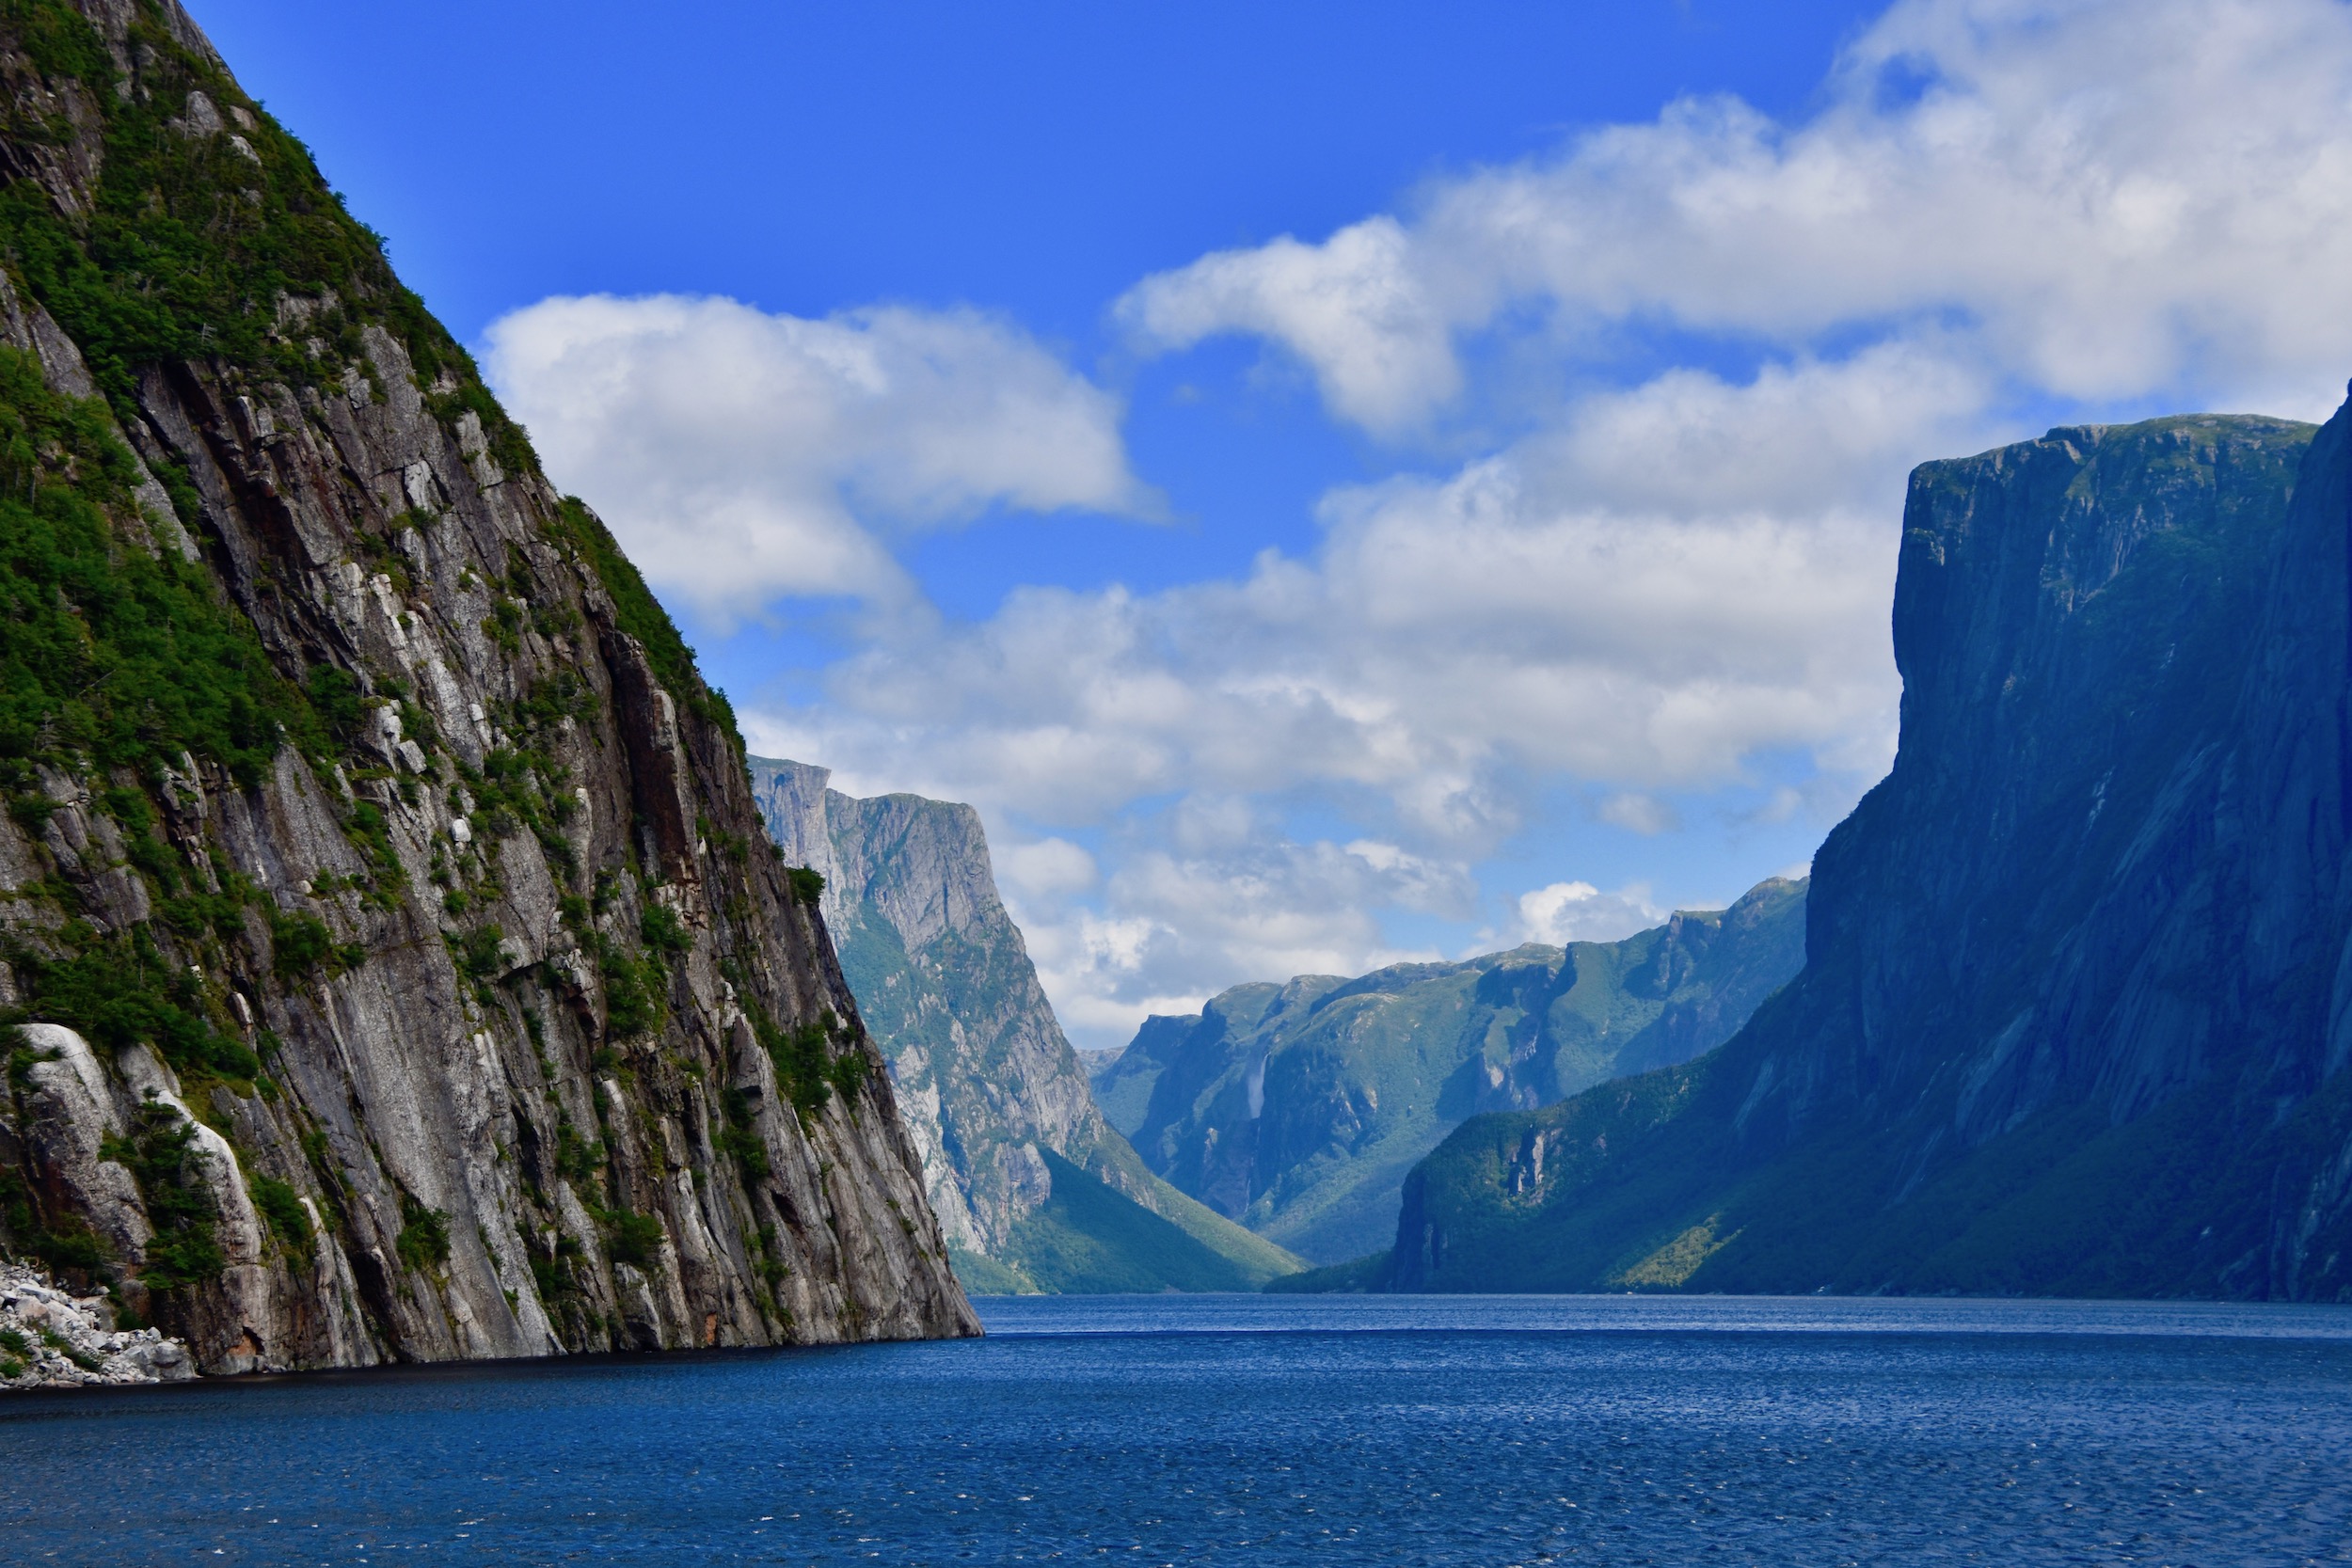 directions to western brook pond boat tour